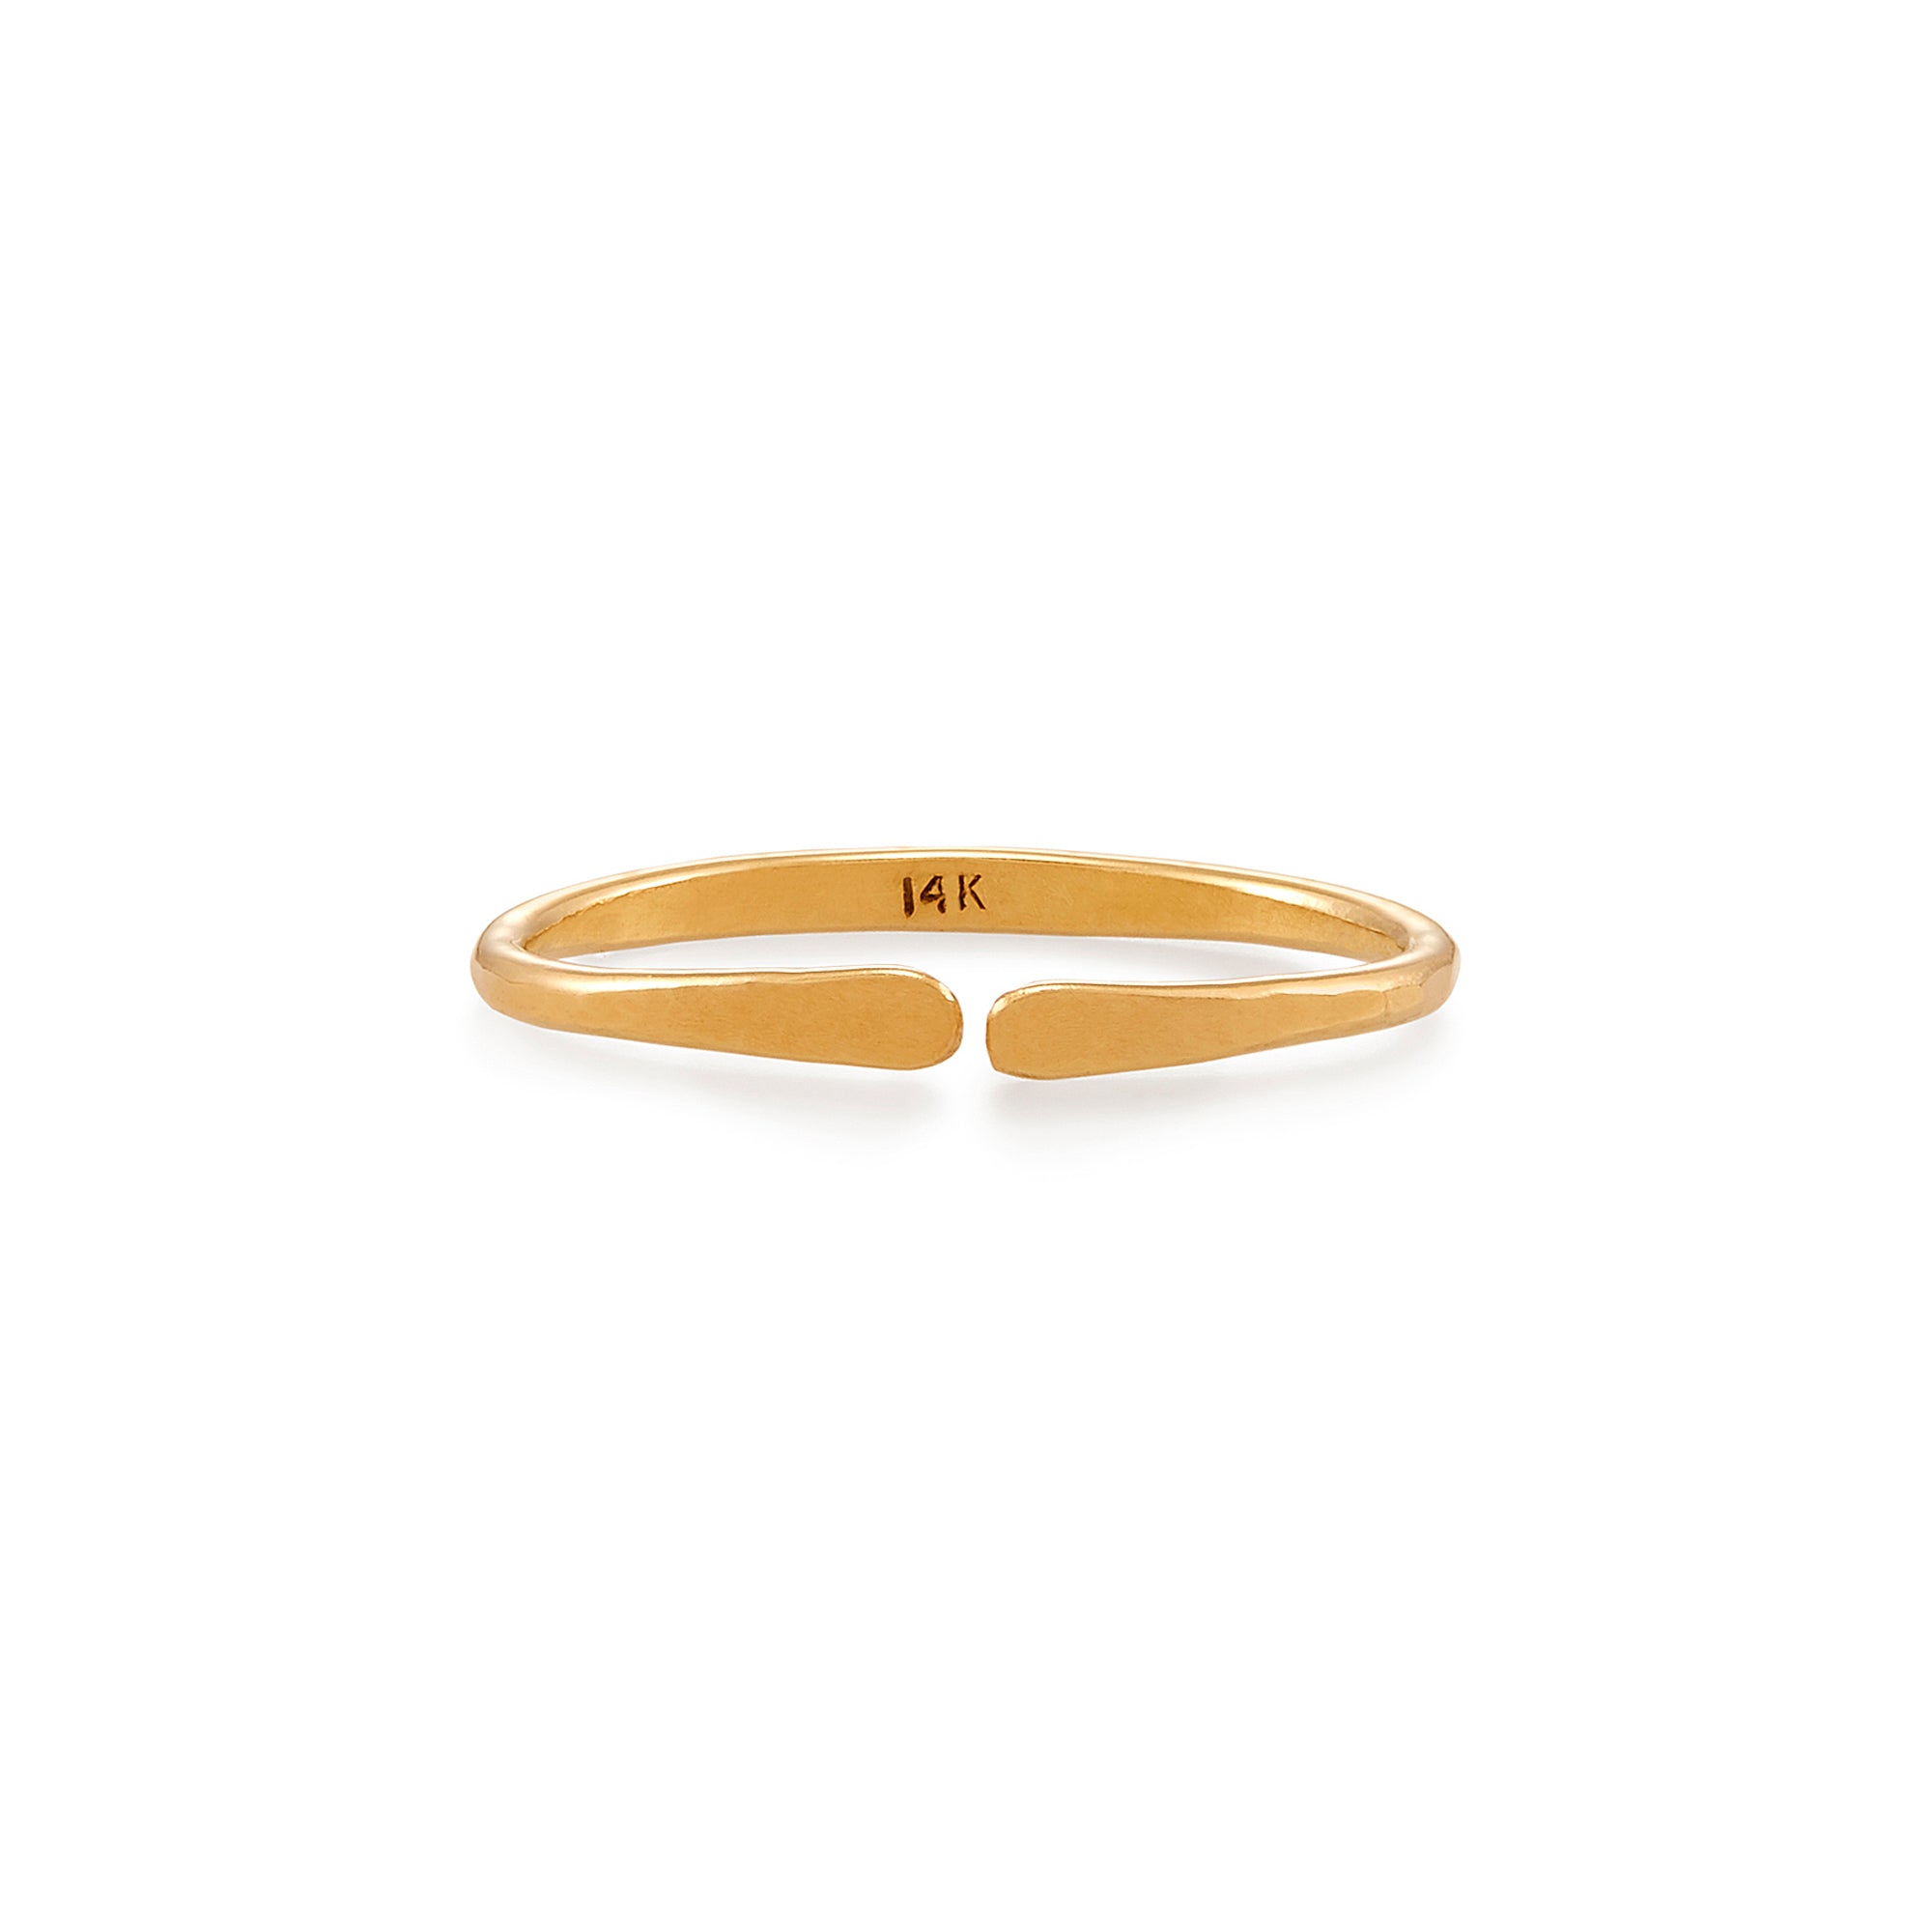 14k gold Open Ring, a simple and delicate hand-forged ring that is perfect for stacking or lovely on its own.